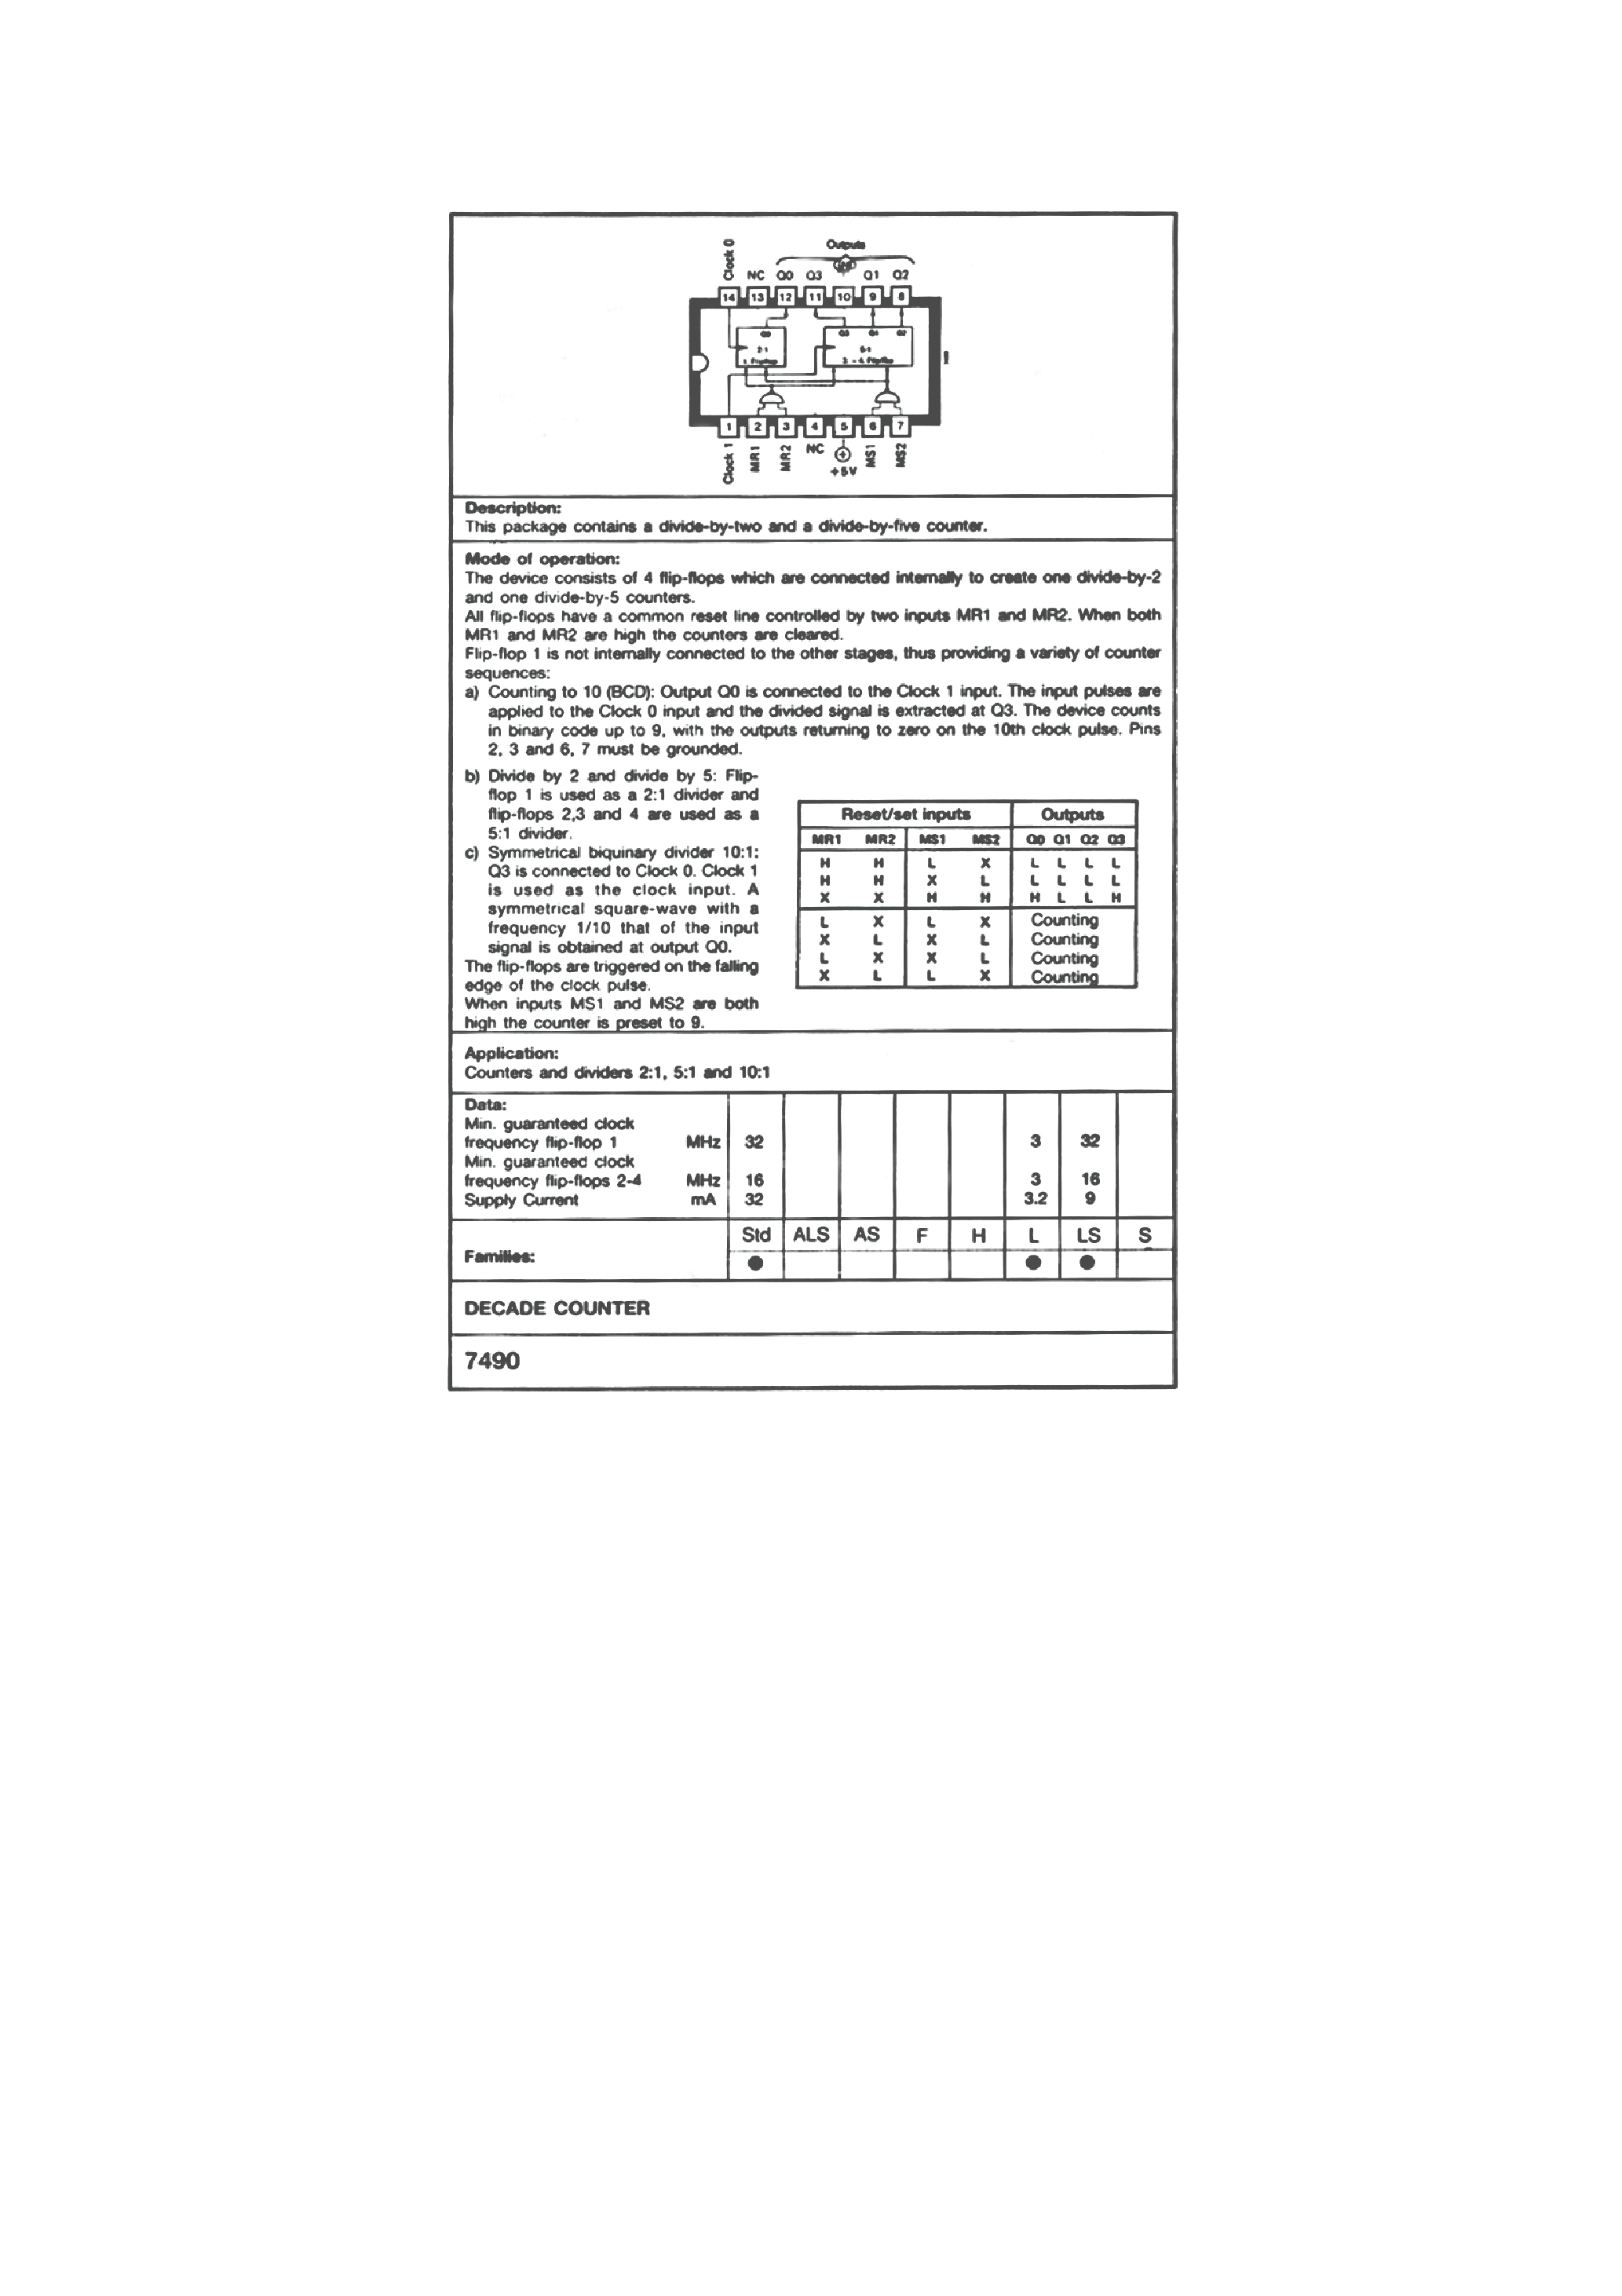 Datasheet 7490 - Package Contains a Divide-by-Two and a Divide-by-Five Counter page 1